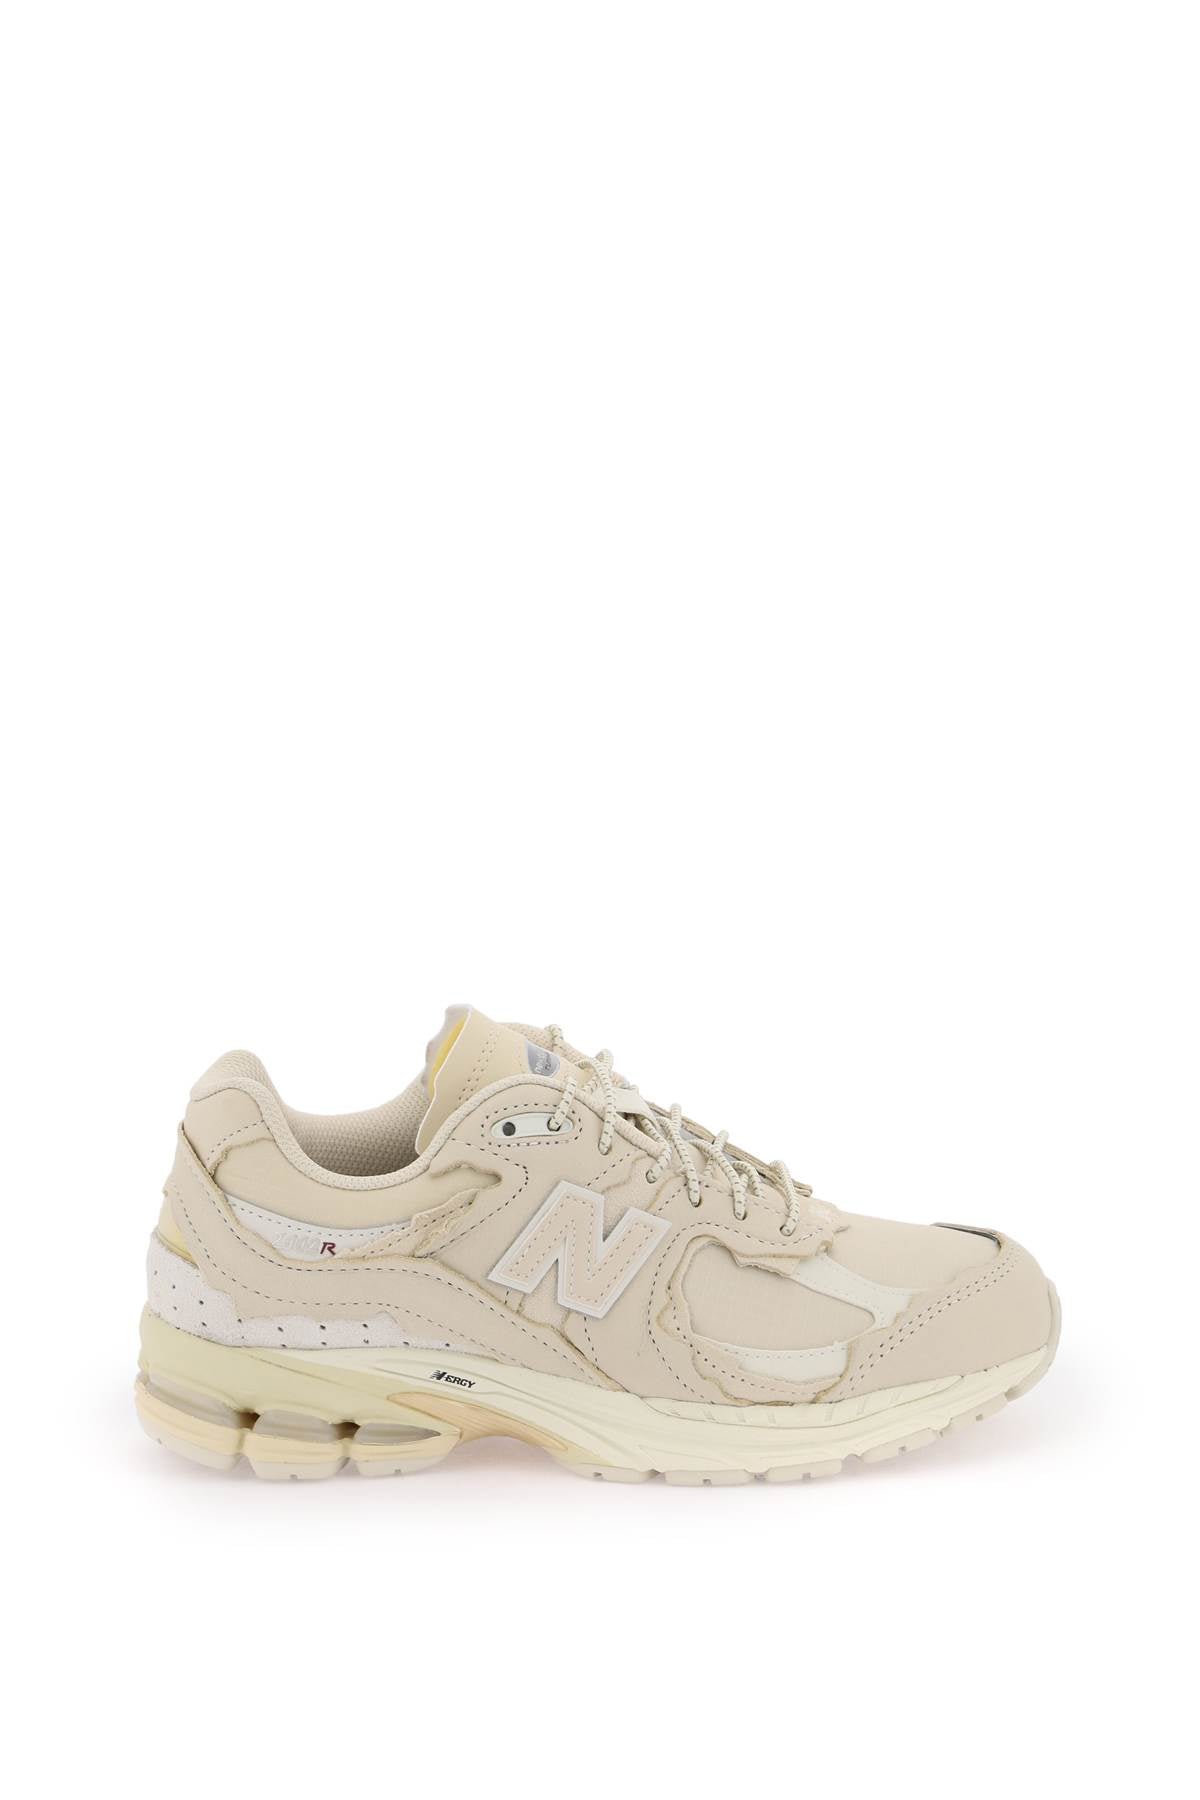 NEW BALANCE 2002 RD SNEAKERS